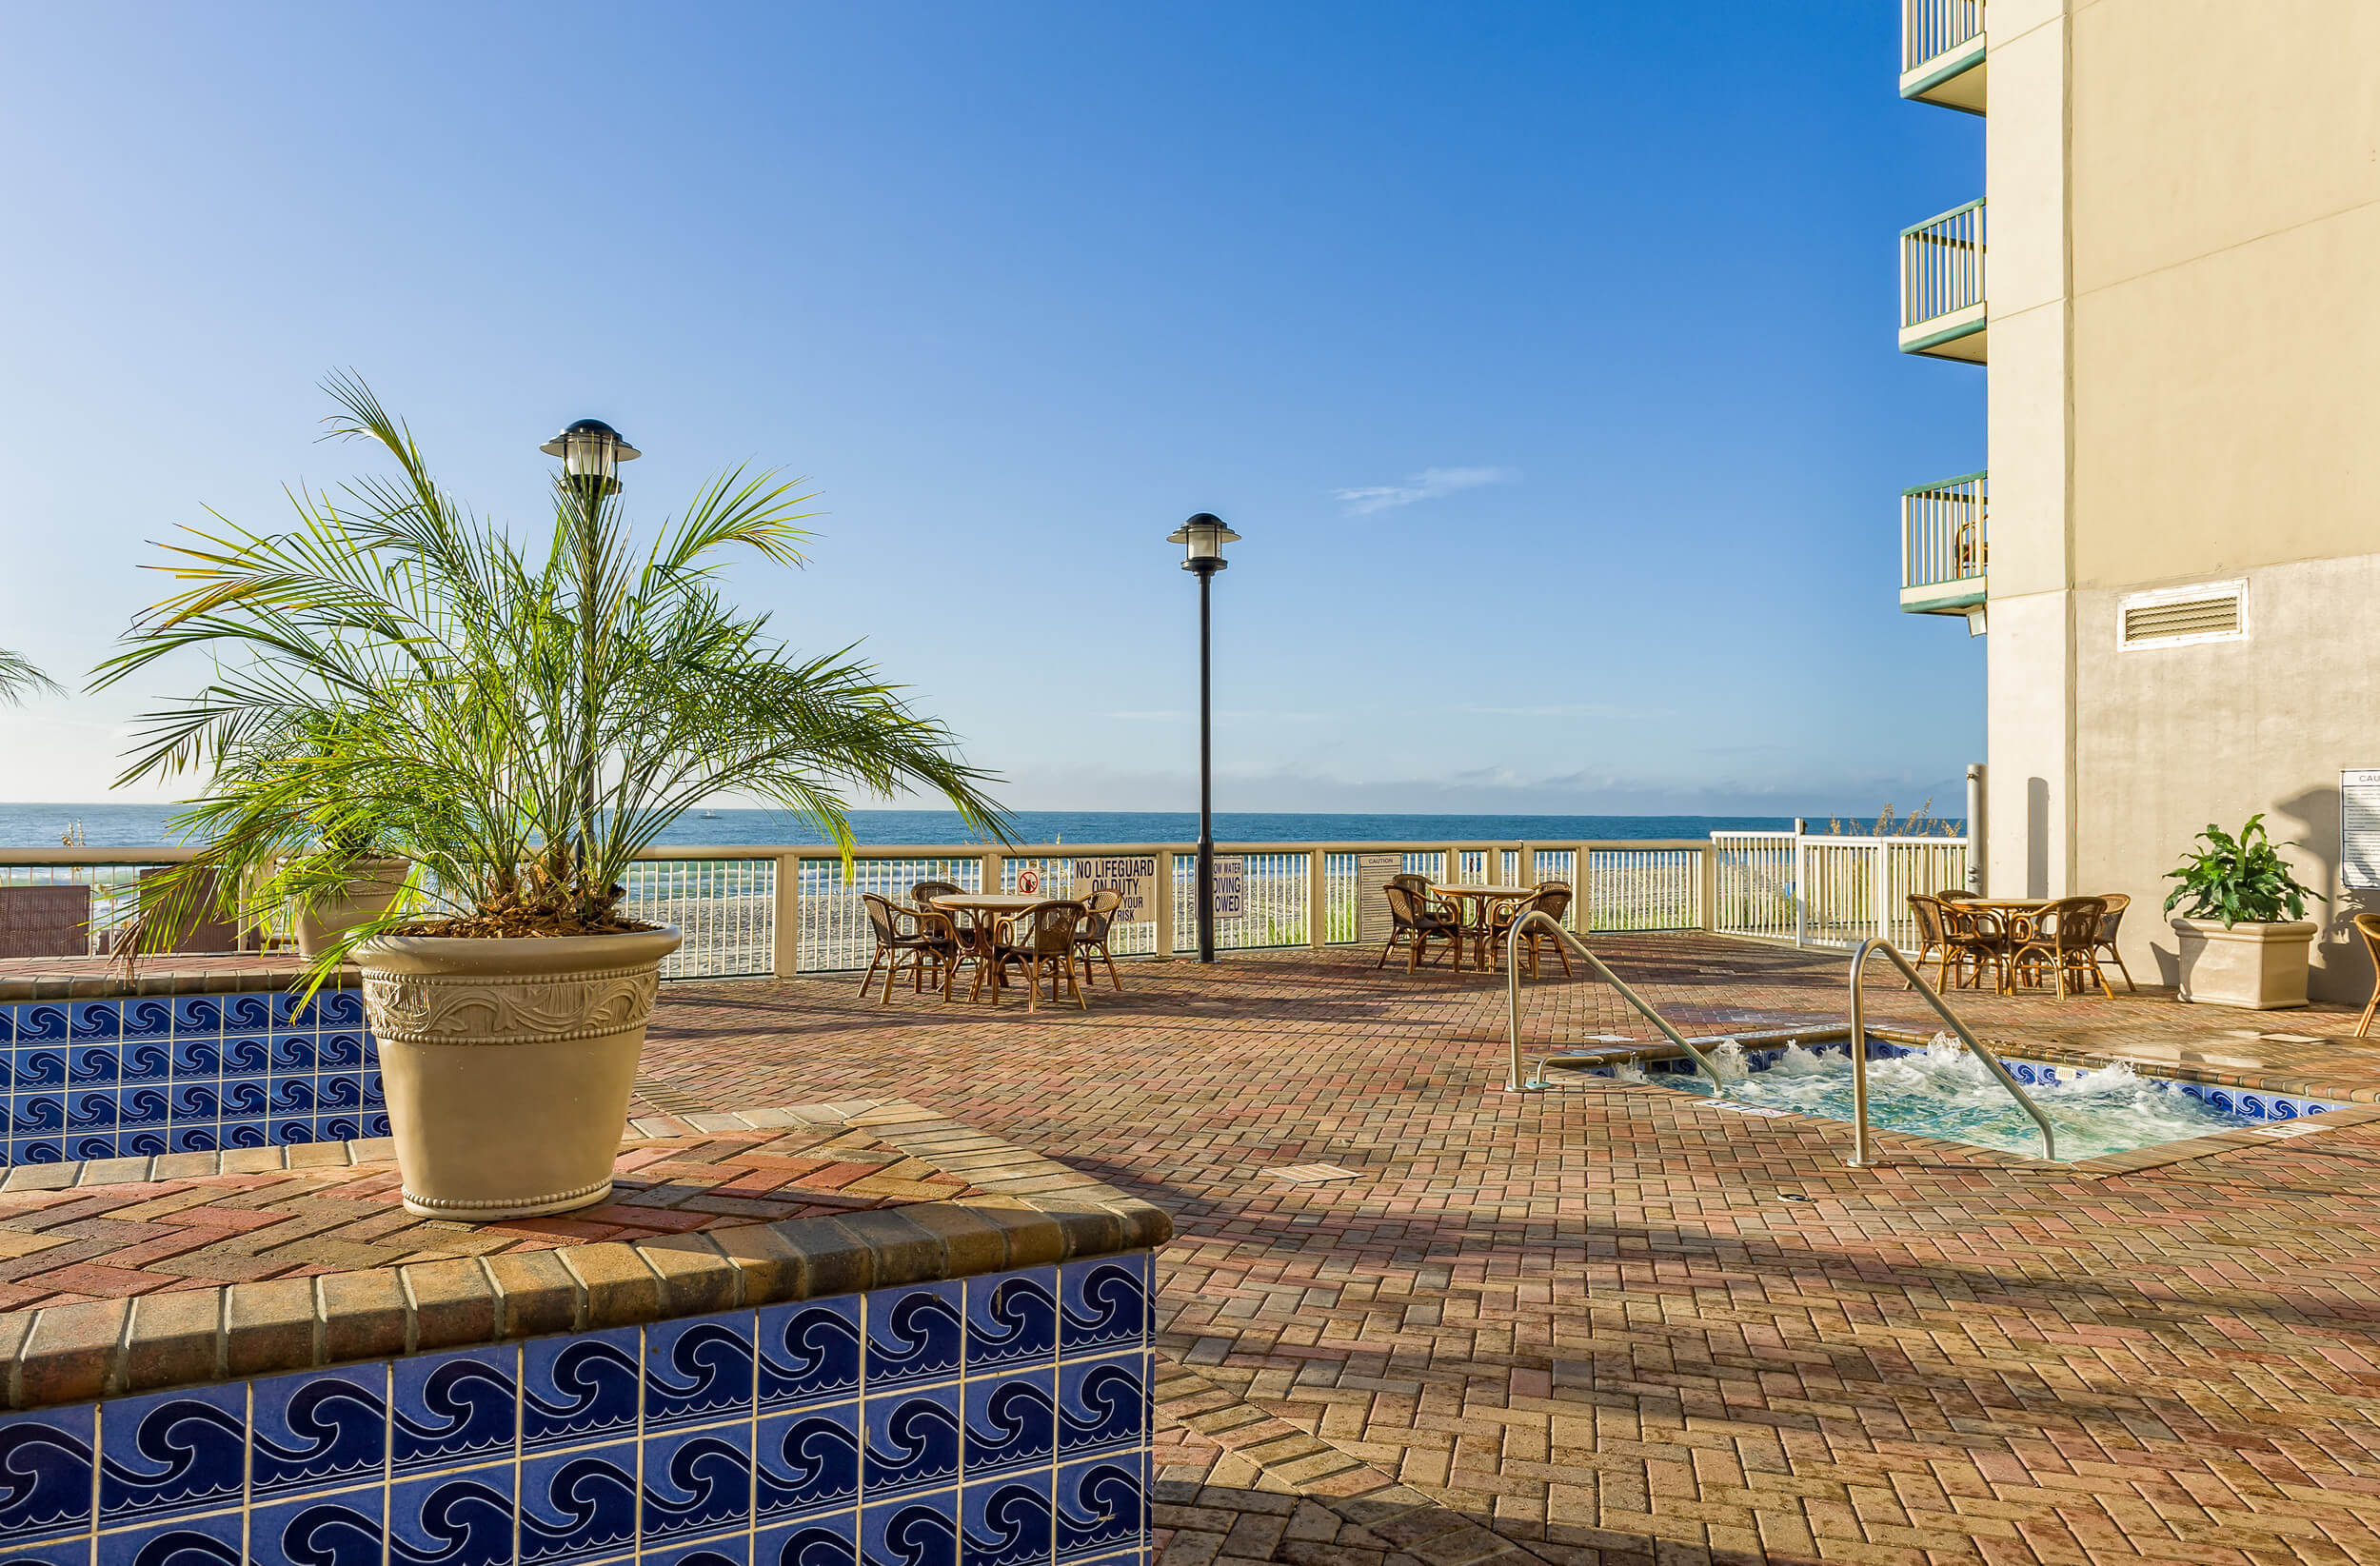 Outdoor beachfront deck with tables and chairs | Westgate Myrtle Beach Oceanfront Resort